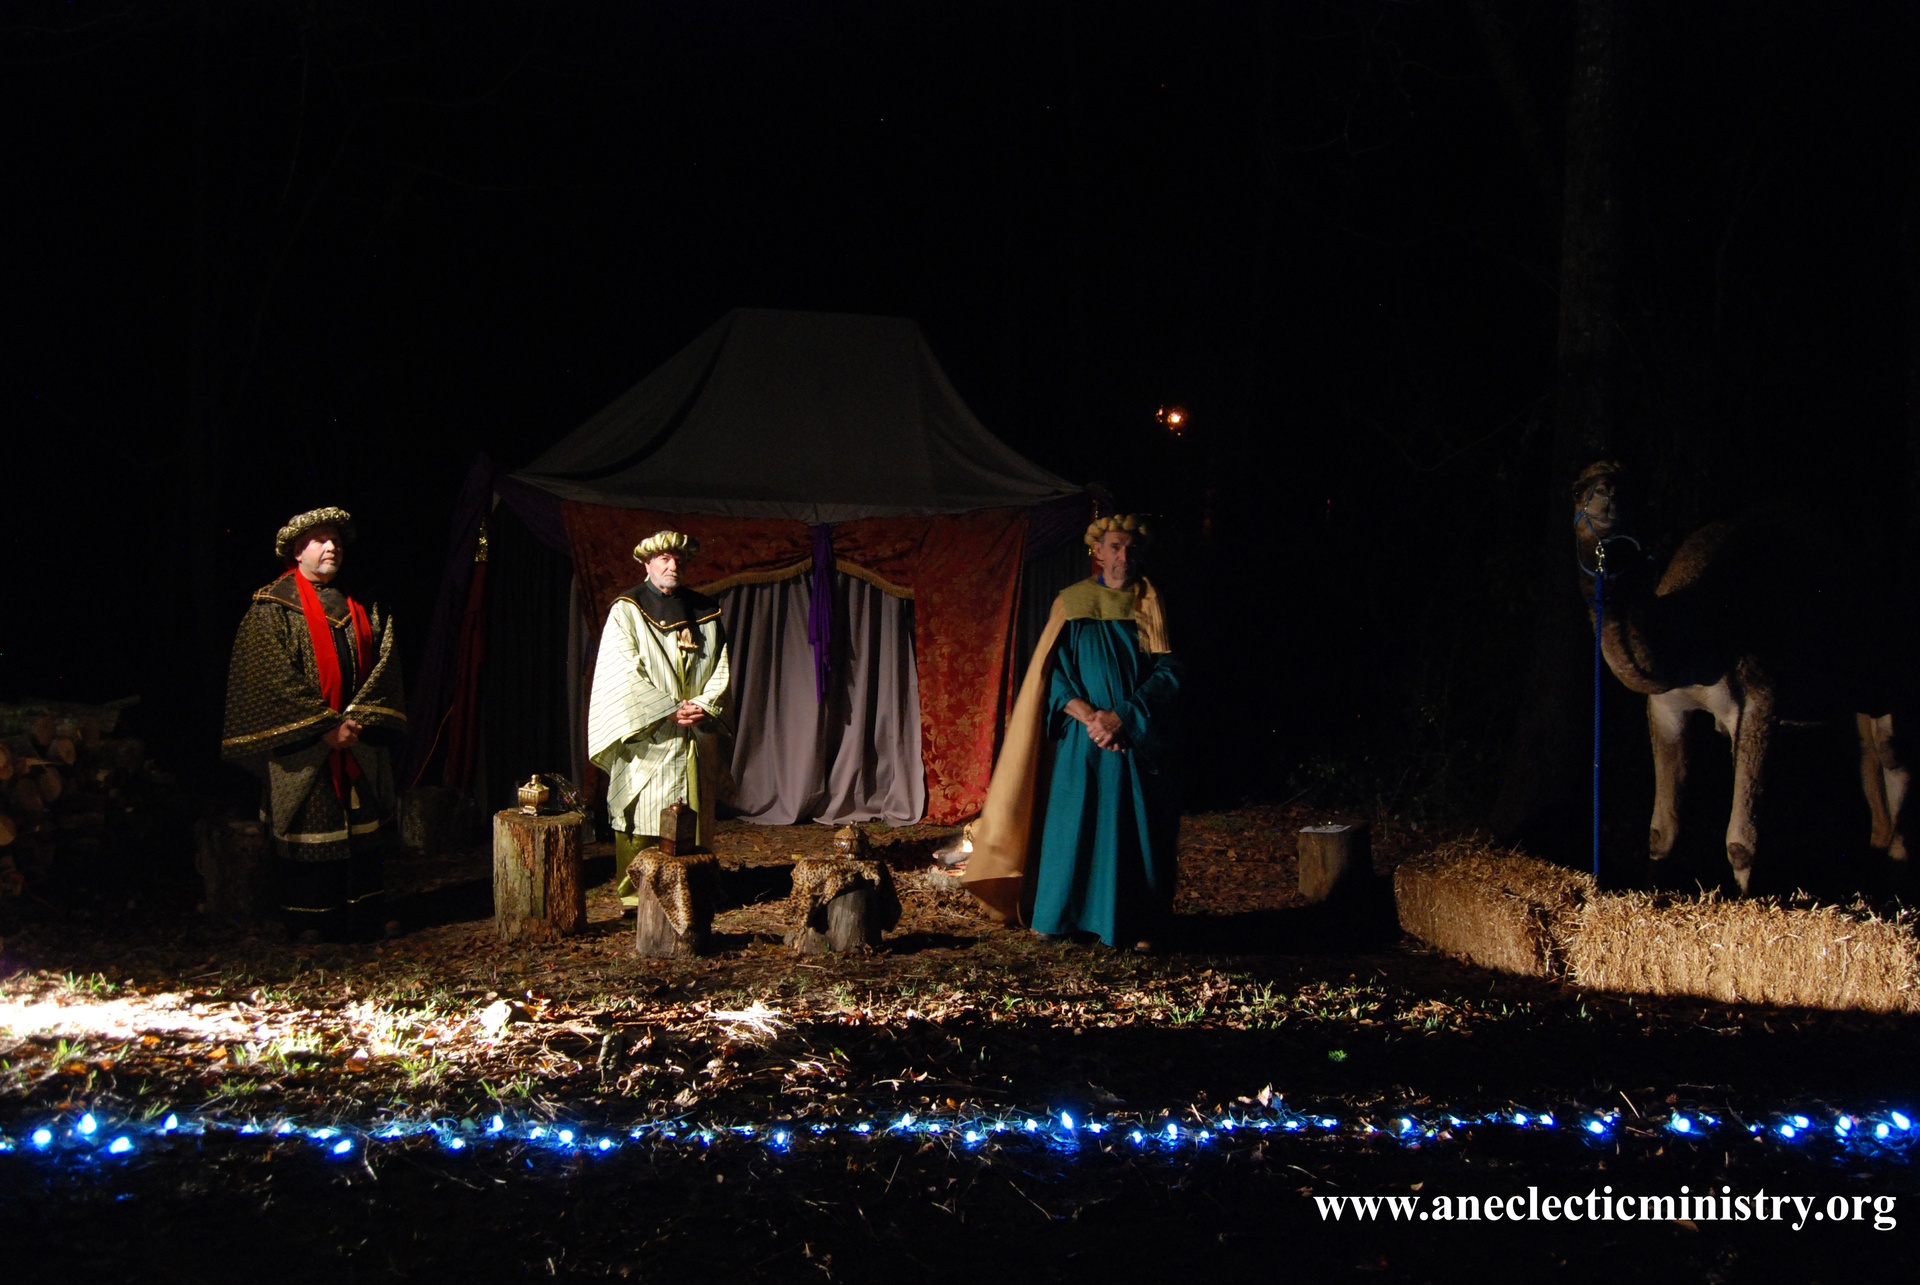 Magi camped for the night on their journey to find the promised Messiah